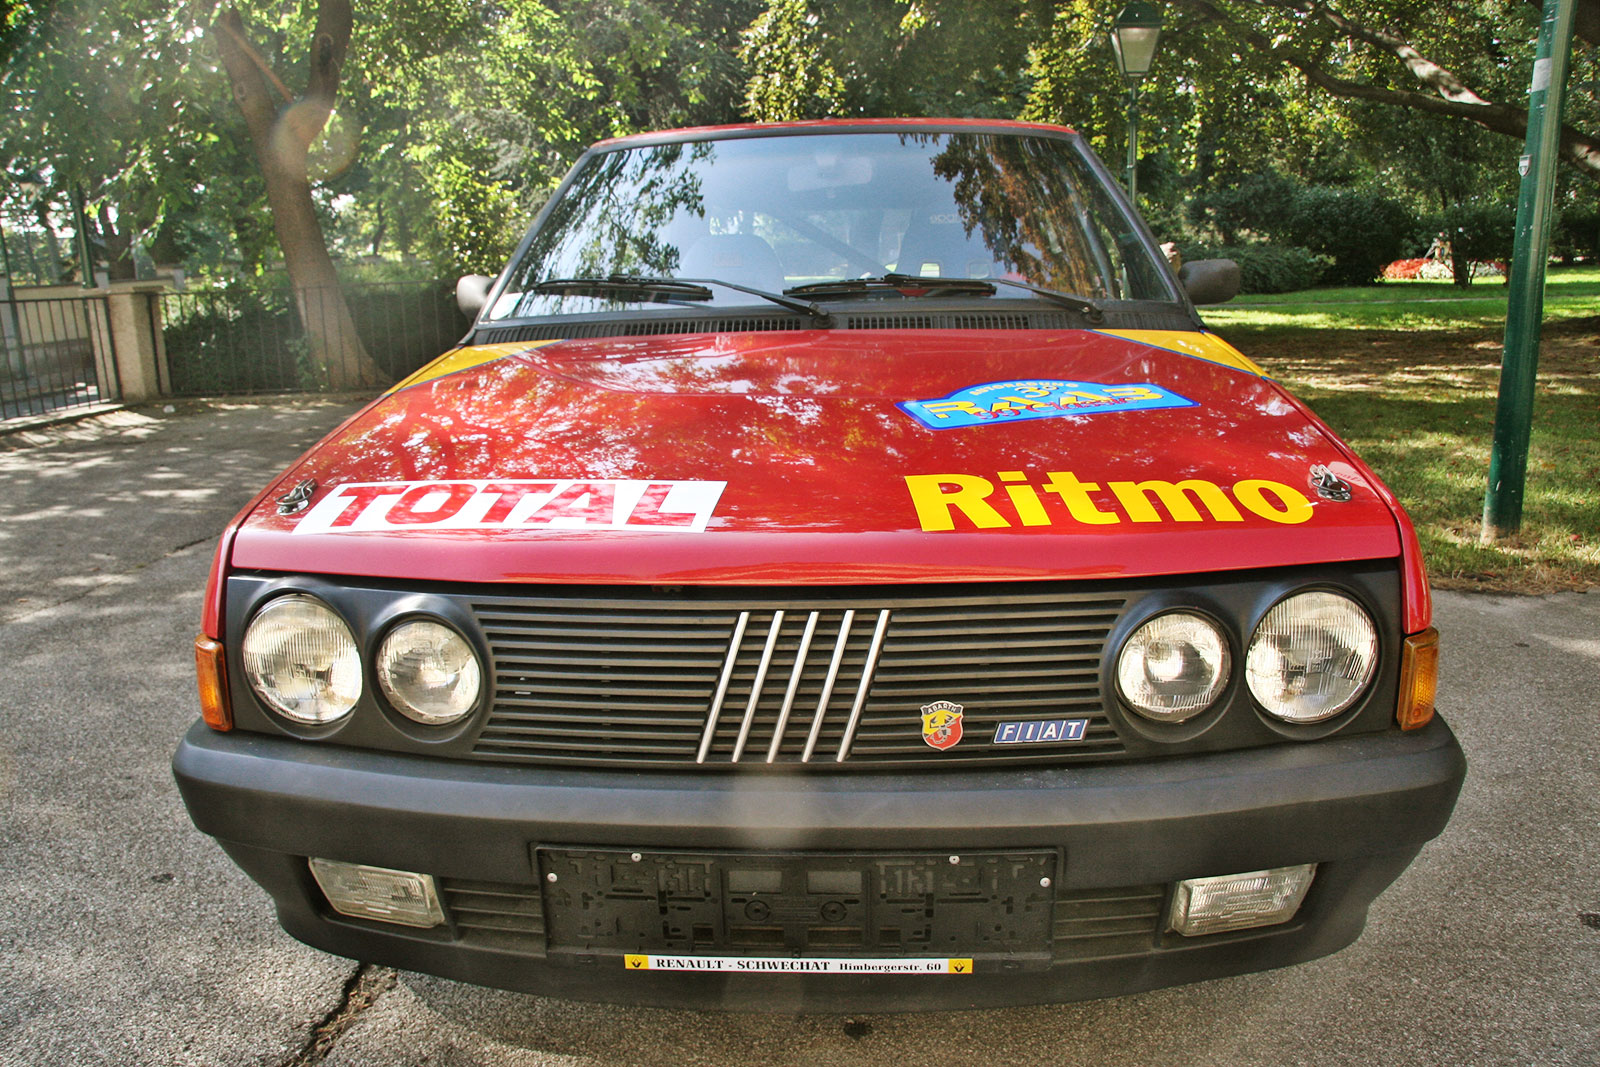 Fiat Ritmo 130 Tc Abarth The Schwab Collection Vintage Rally Cars